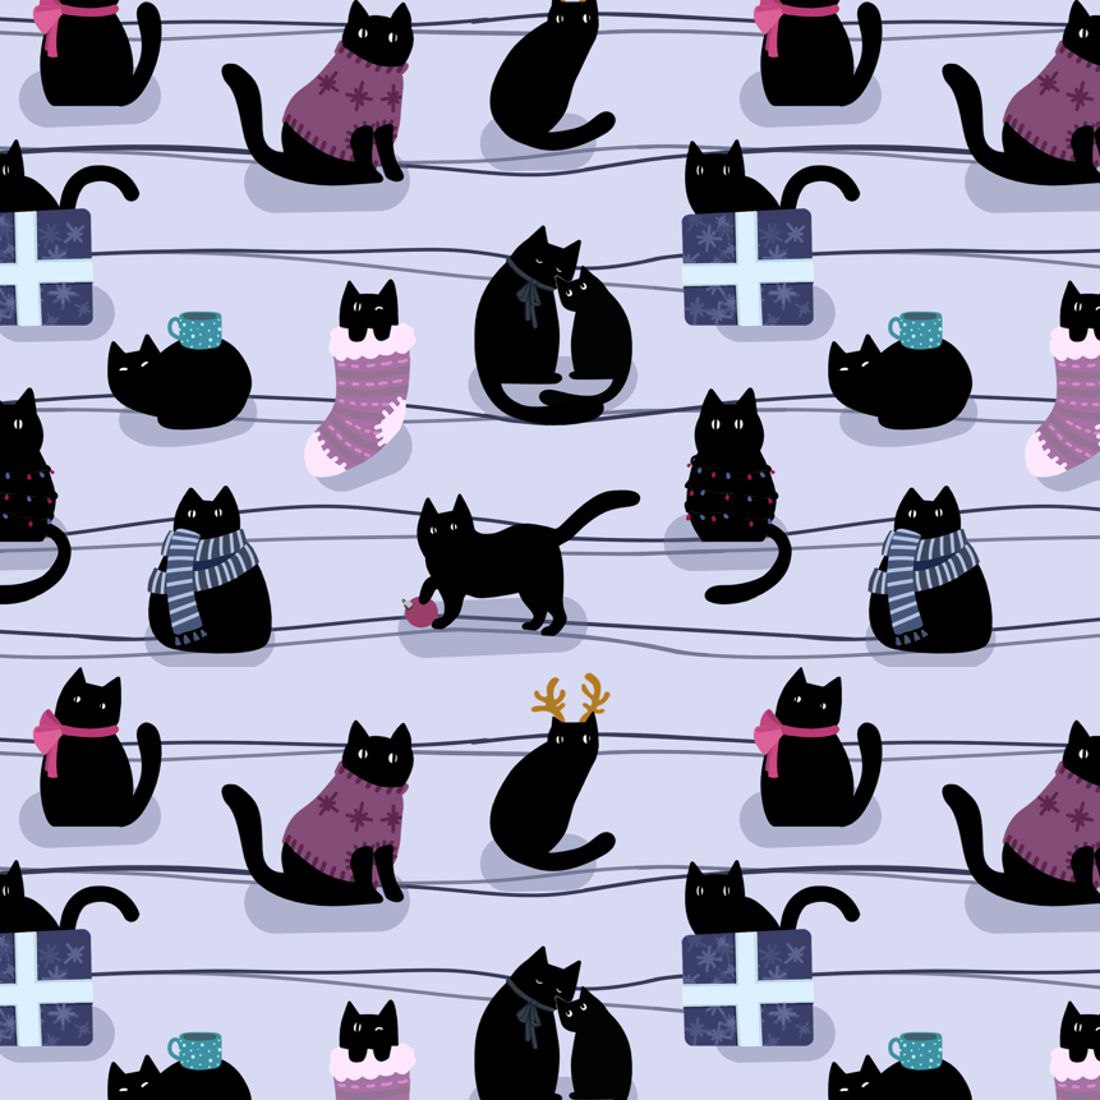 A Christmas pattern with black cats preview image.